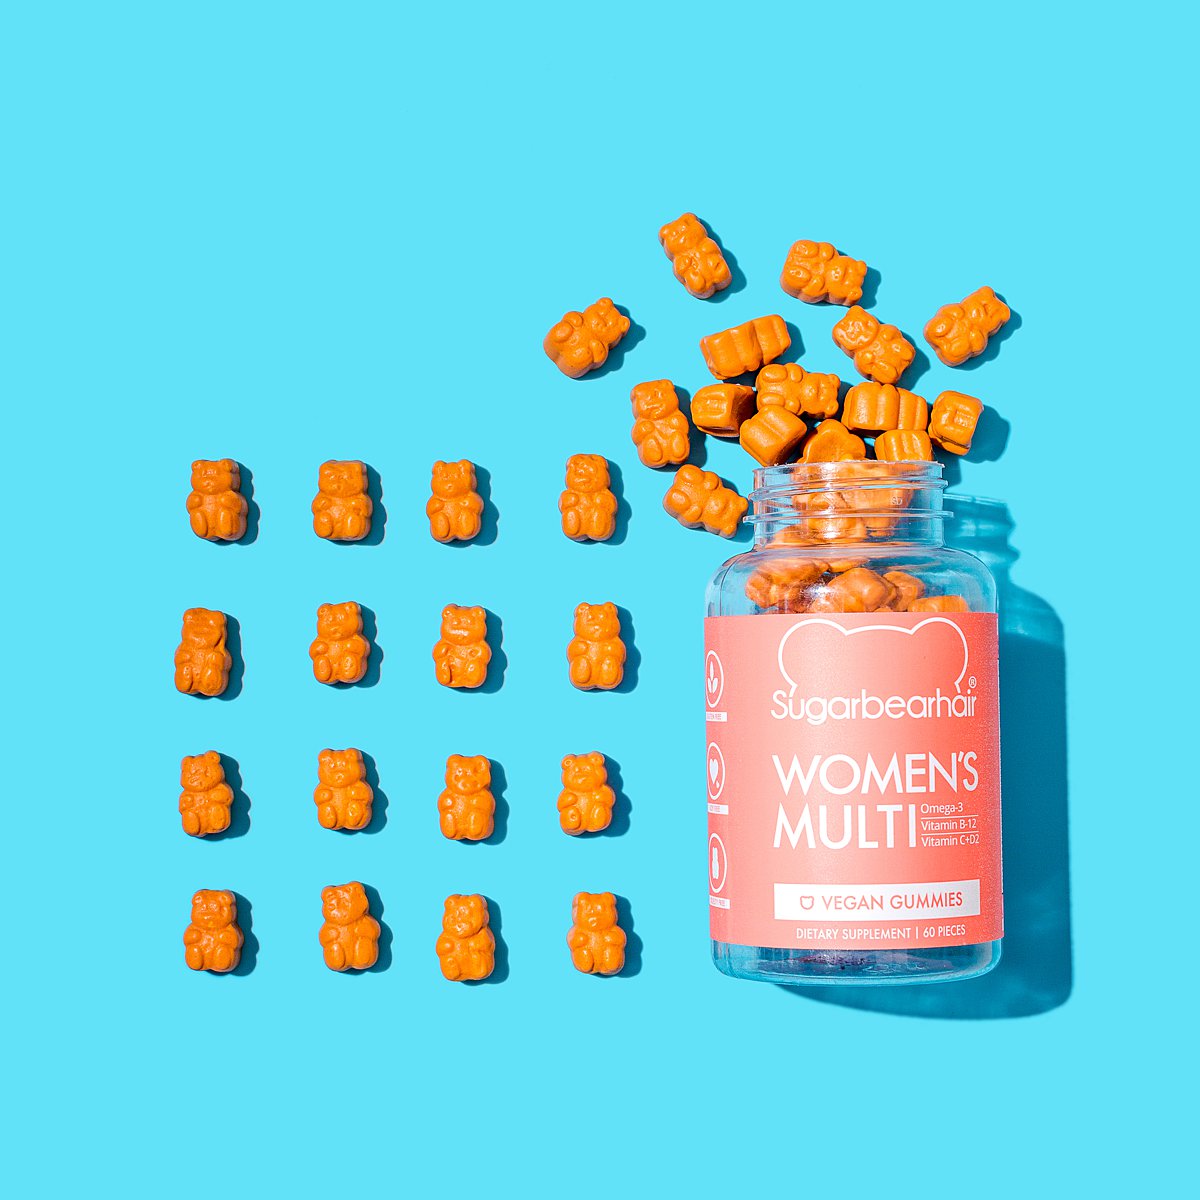 Colourful content creation for SugarBearHair vitamin supplements. Styled cosmetics product photography by Marianne Taylor.